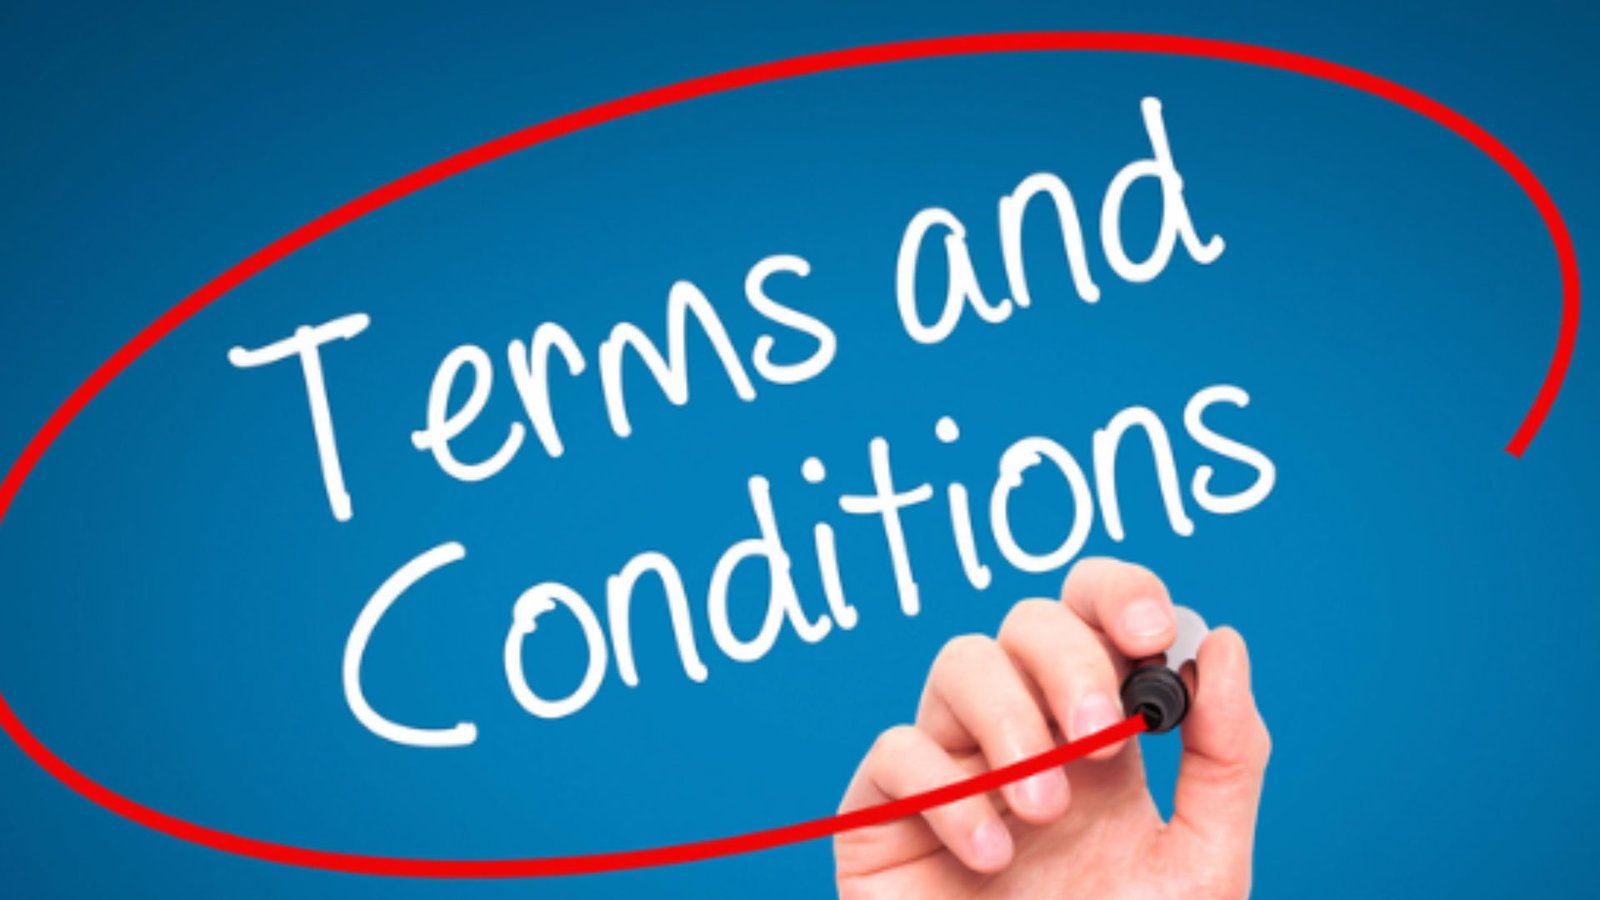 A terms and conditions picture.